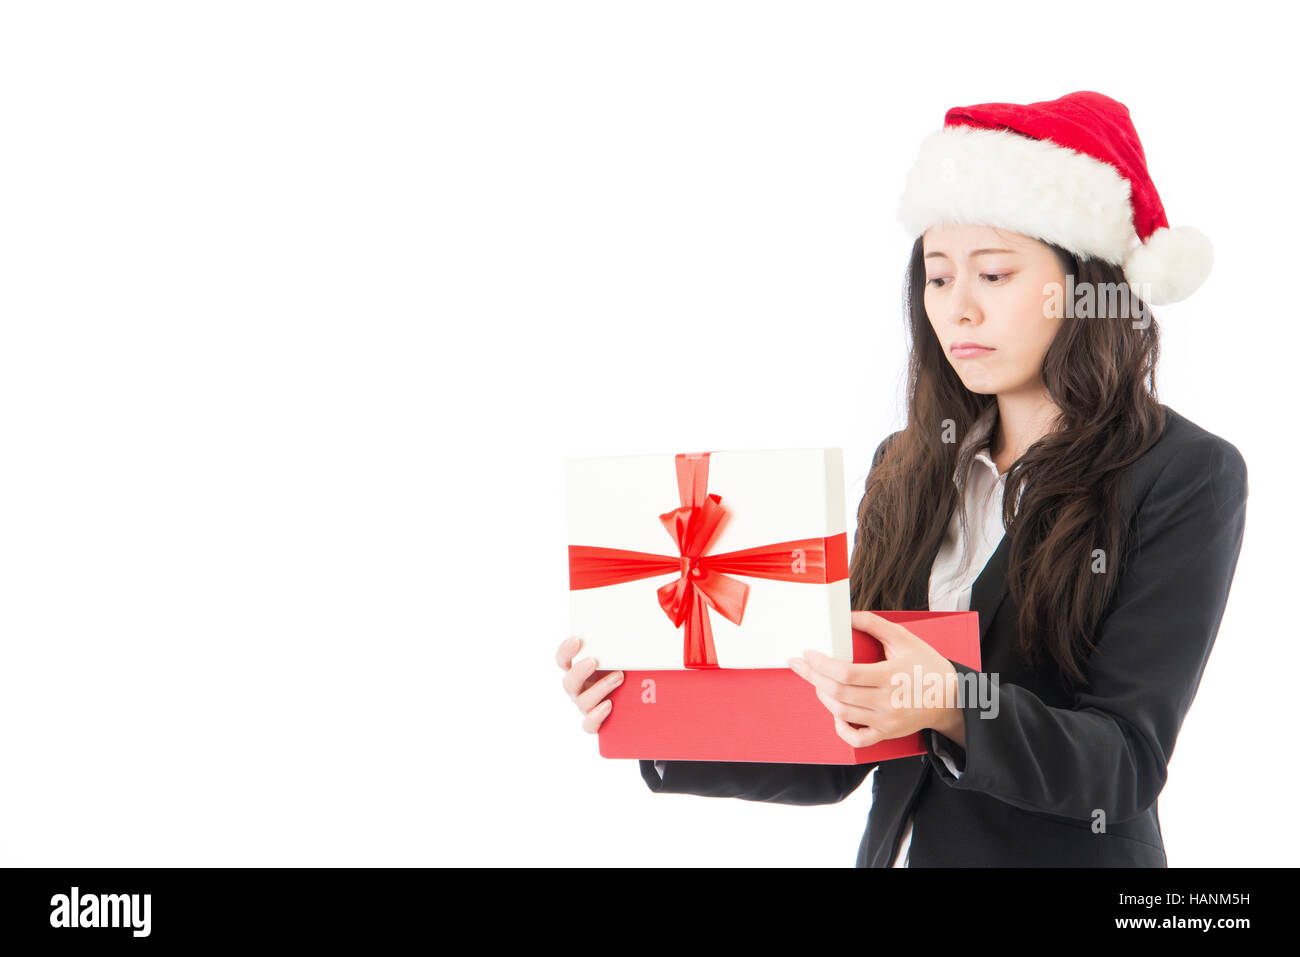 woman opening Christmas gift disappointed and unhappy, Young woman in Santa hat. Funny cute photo of Asian woman isolated on white background. Stock Photo